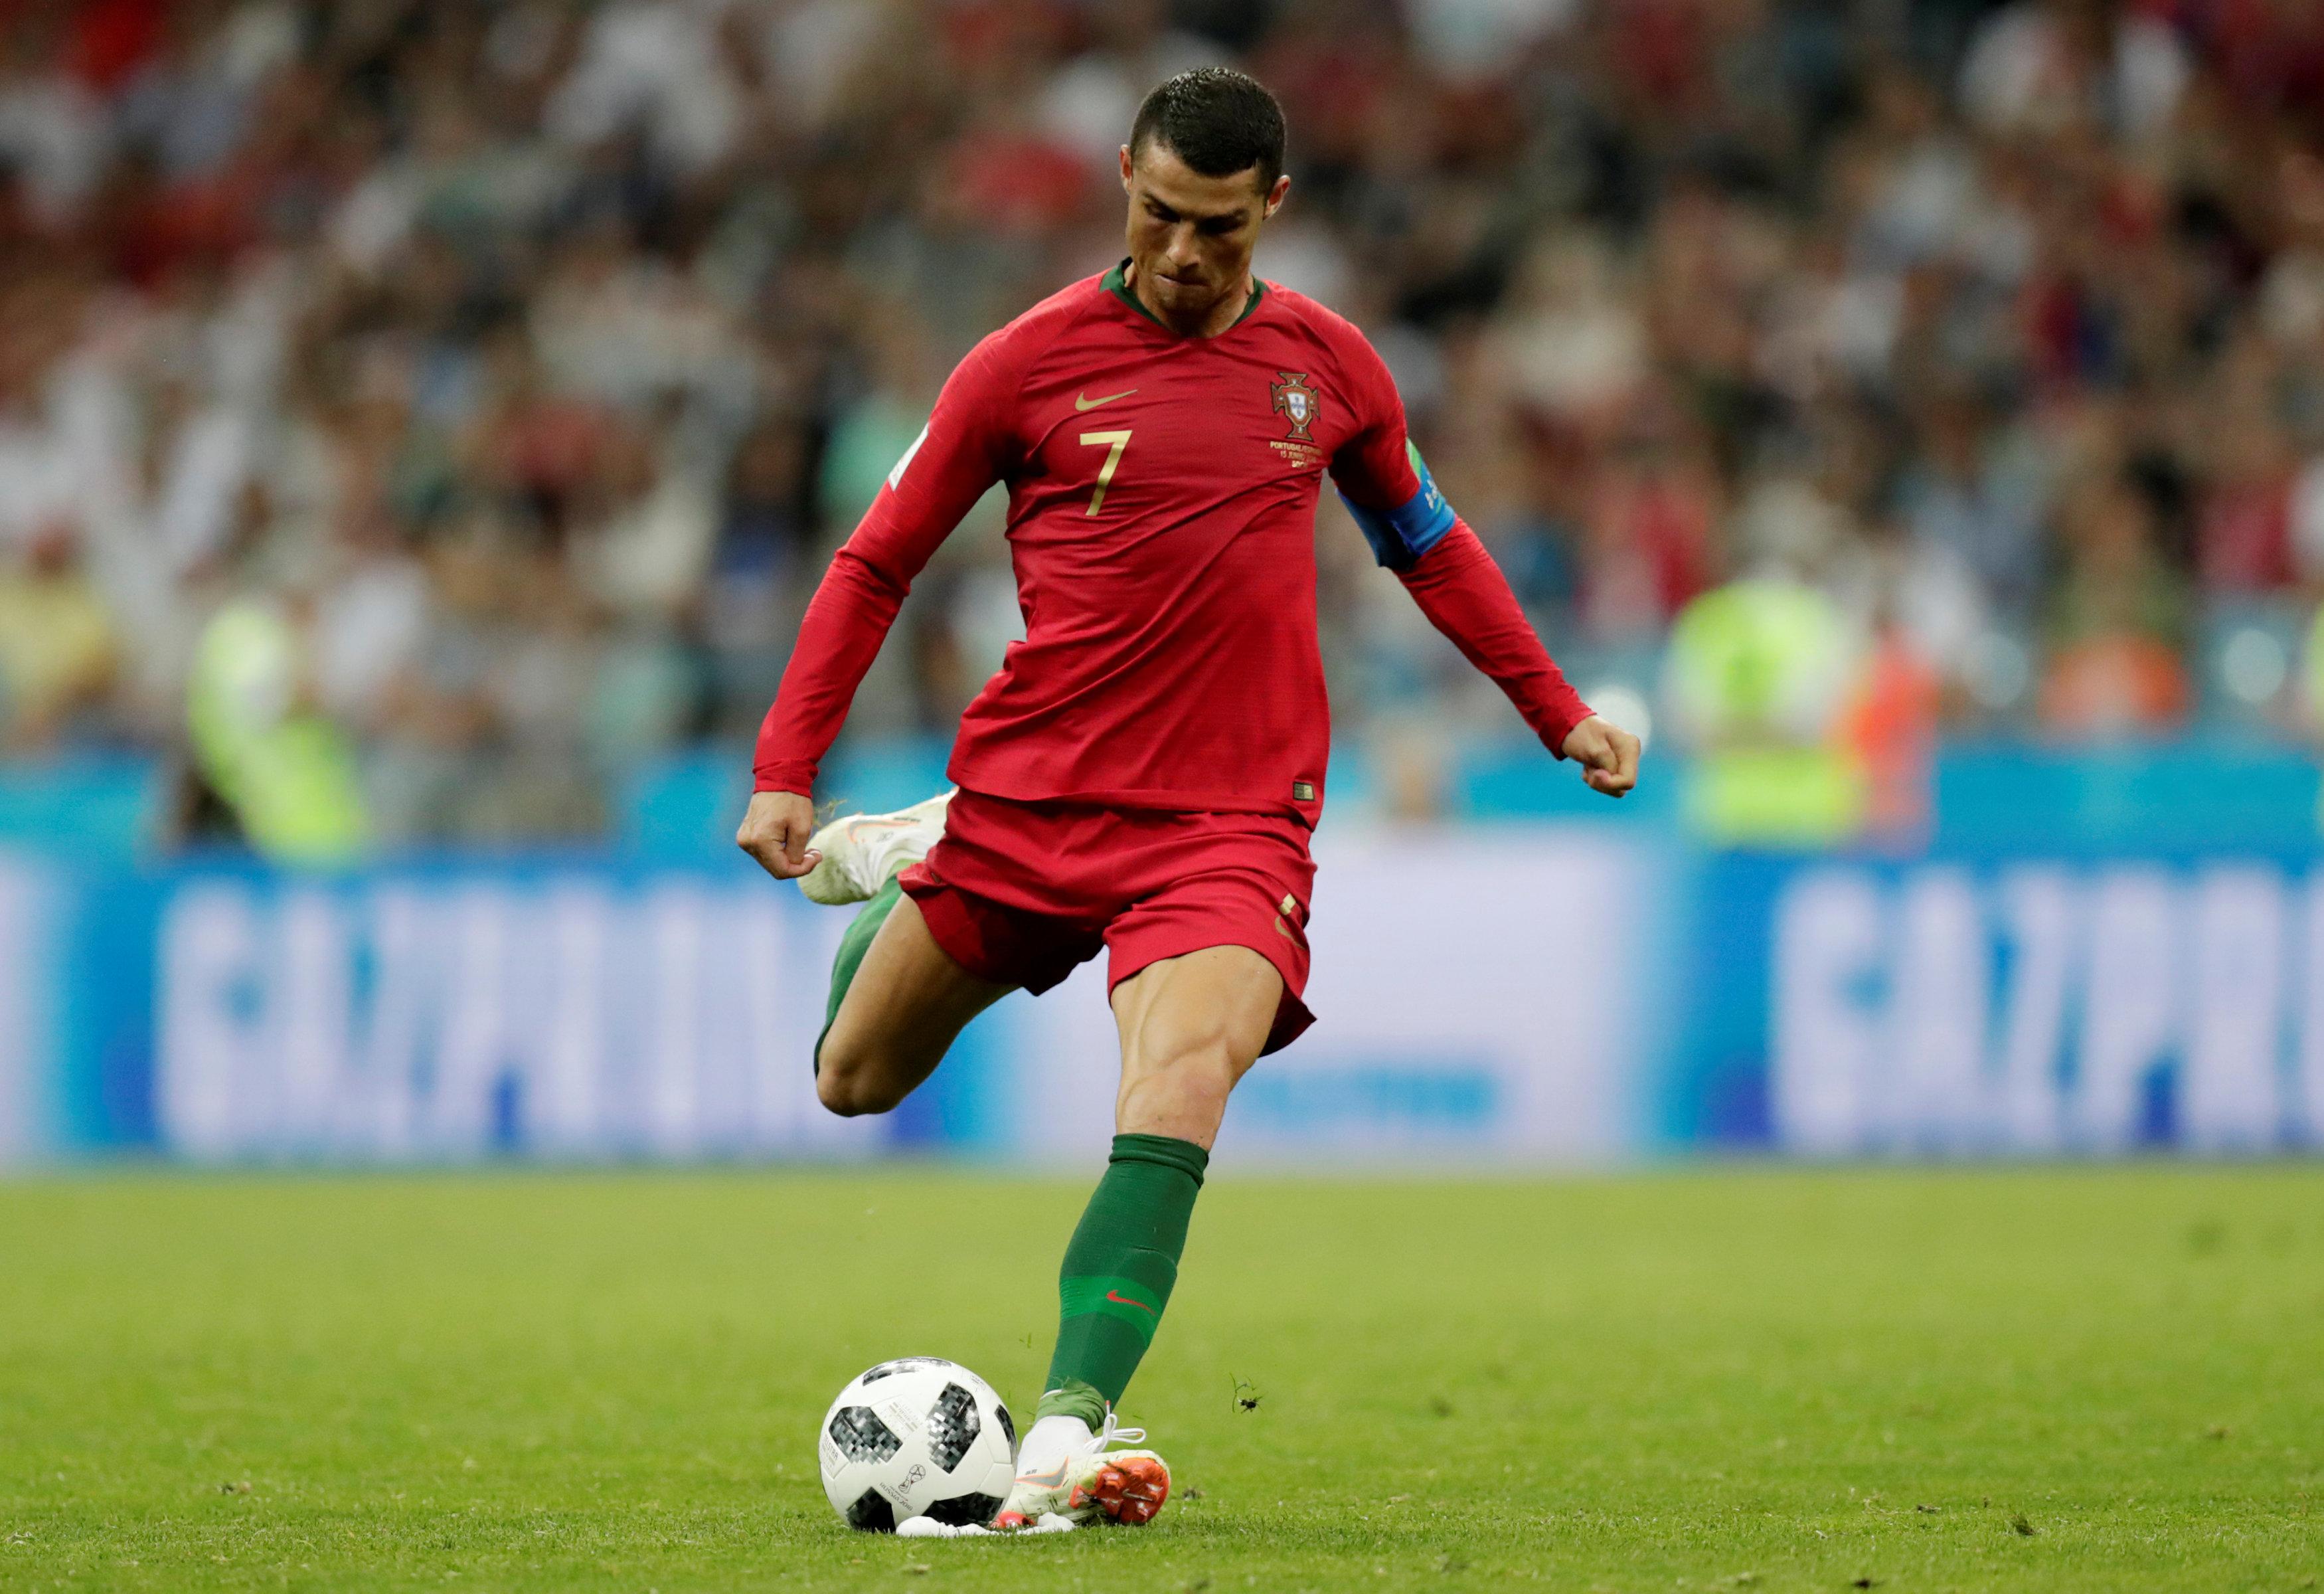 Cristiano Ronaldo at the match between Portugal and Spain at the Fisht Stadium, Sochi, Russia - June 15, 2018 REUTERS/File photo